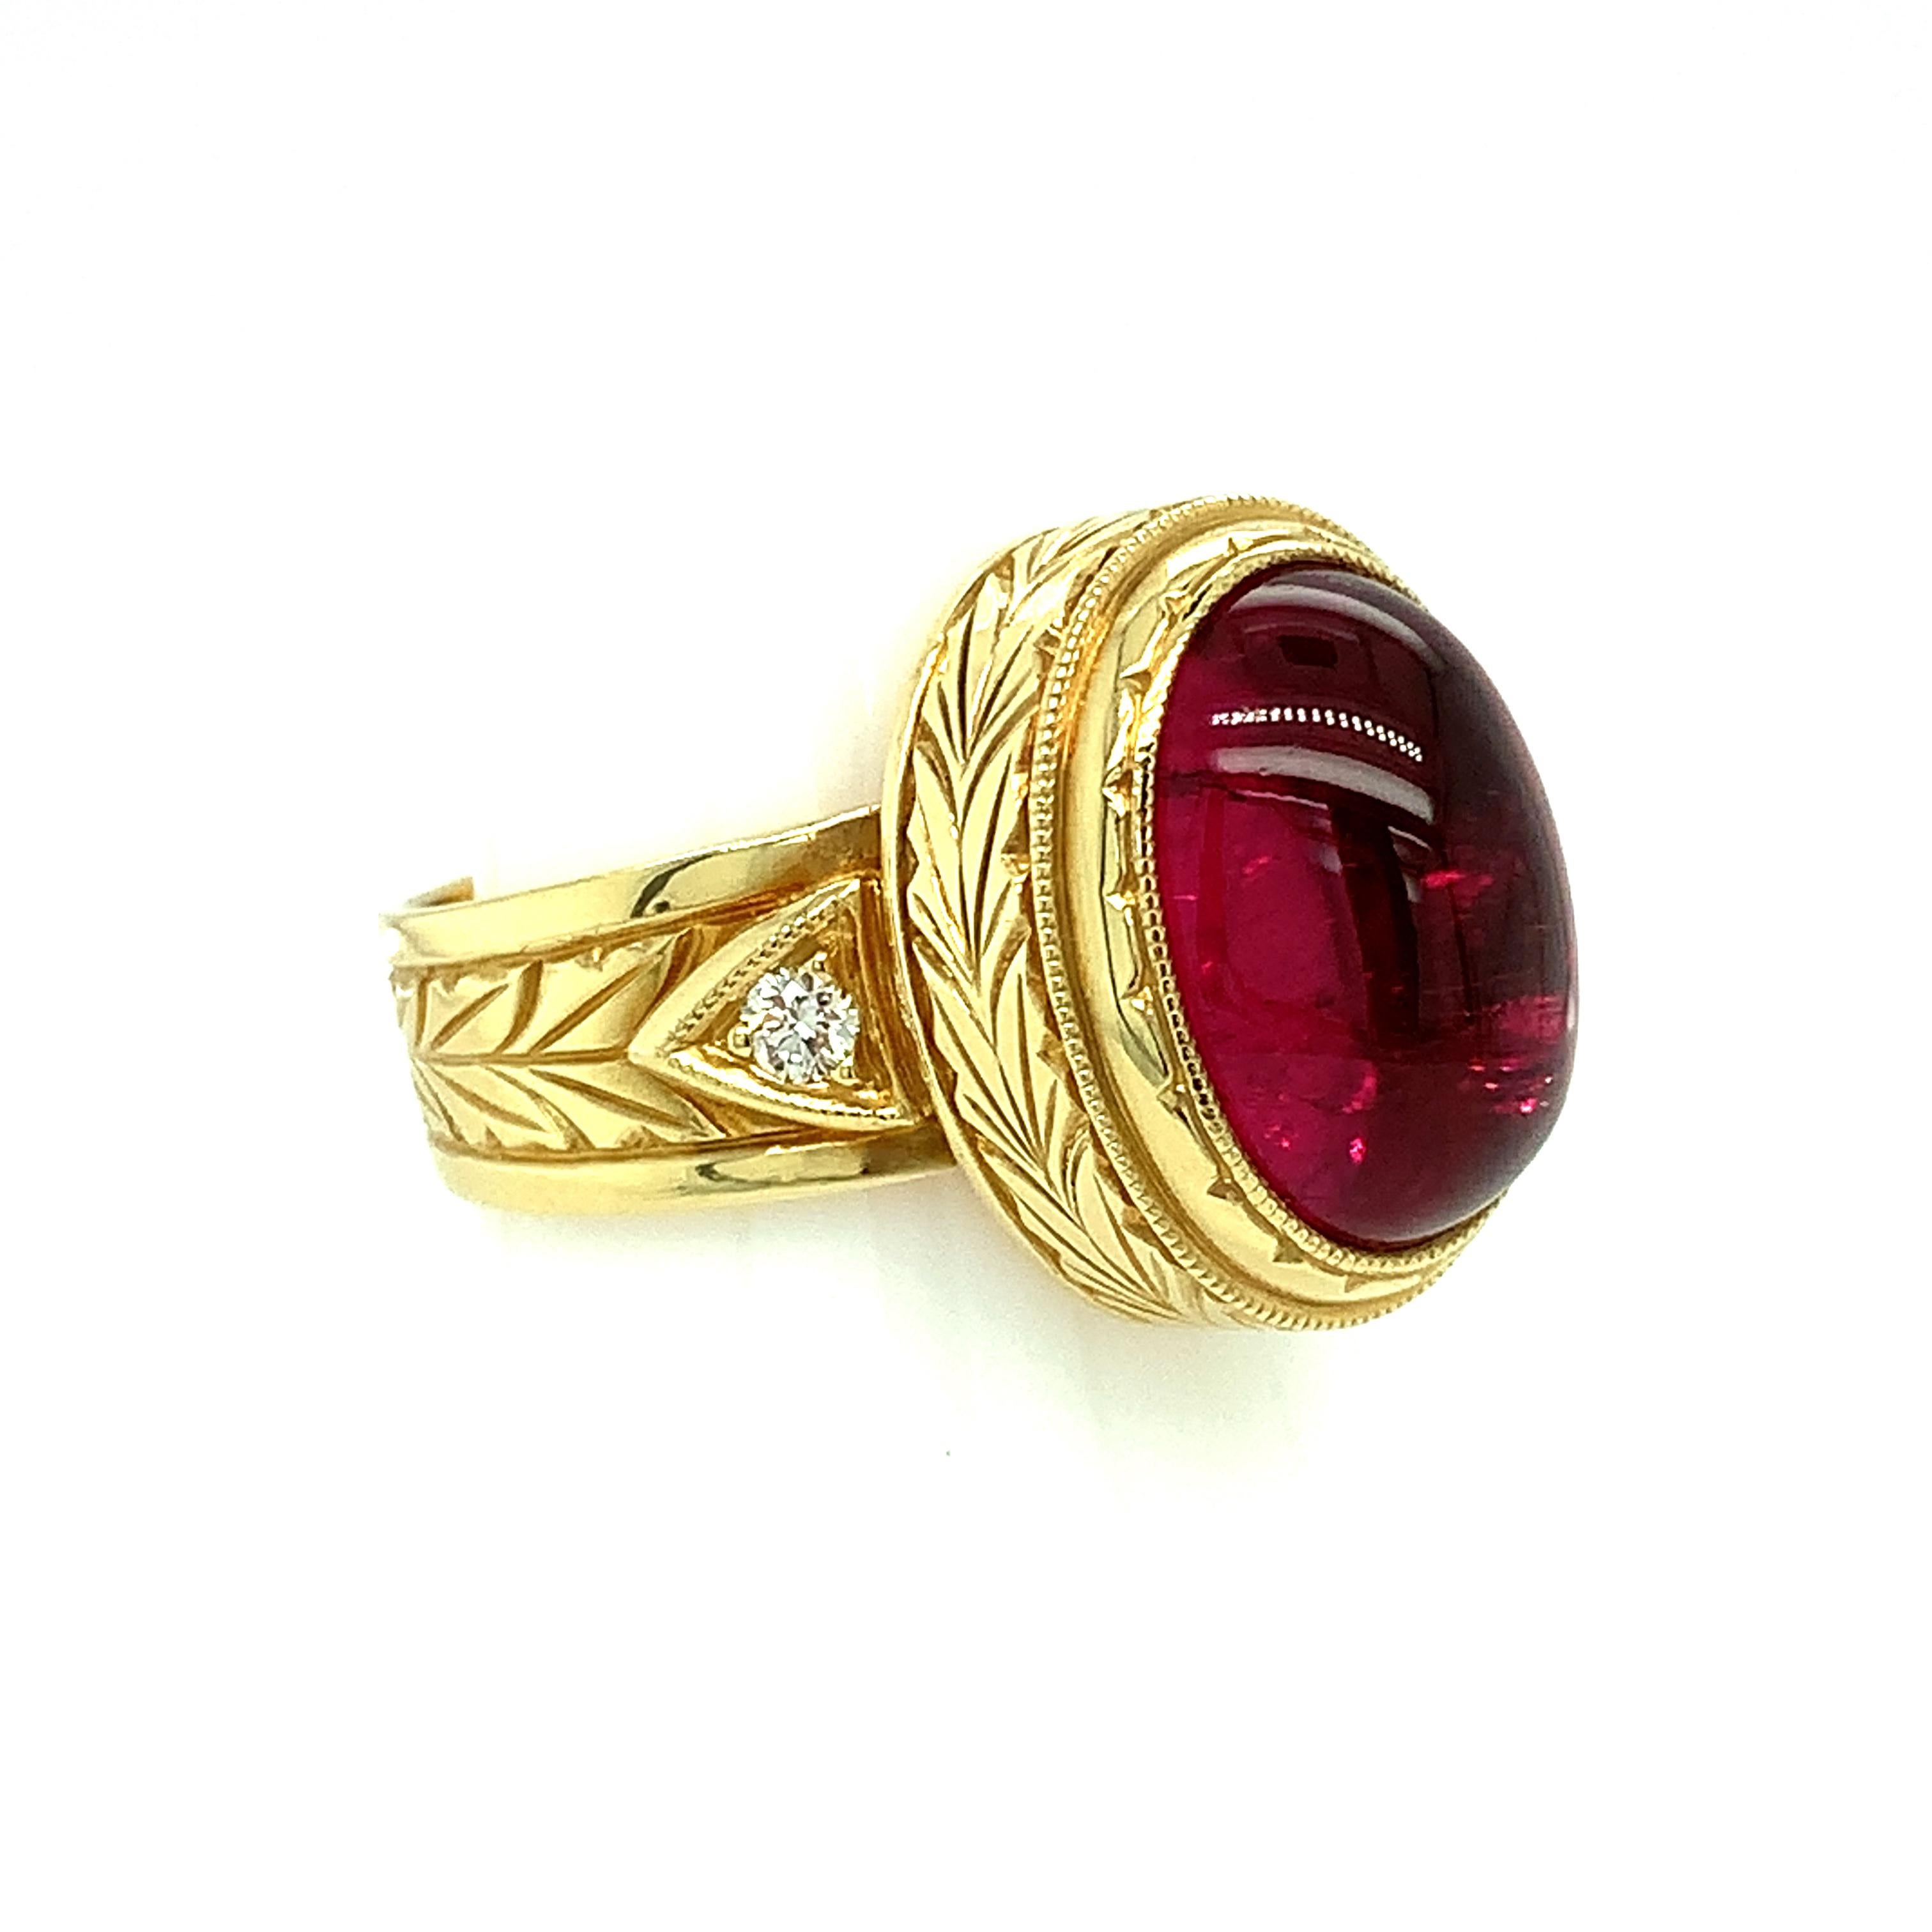 Women's or Men's 7.47 Carat Rubellite Tourmaline Cabochon and Diamond Band Ring in Yellow Gold For Sale